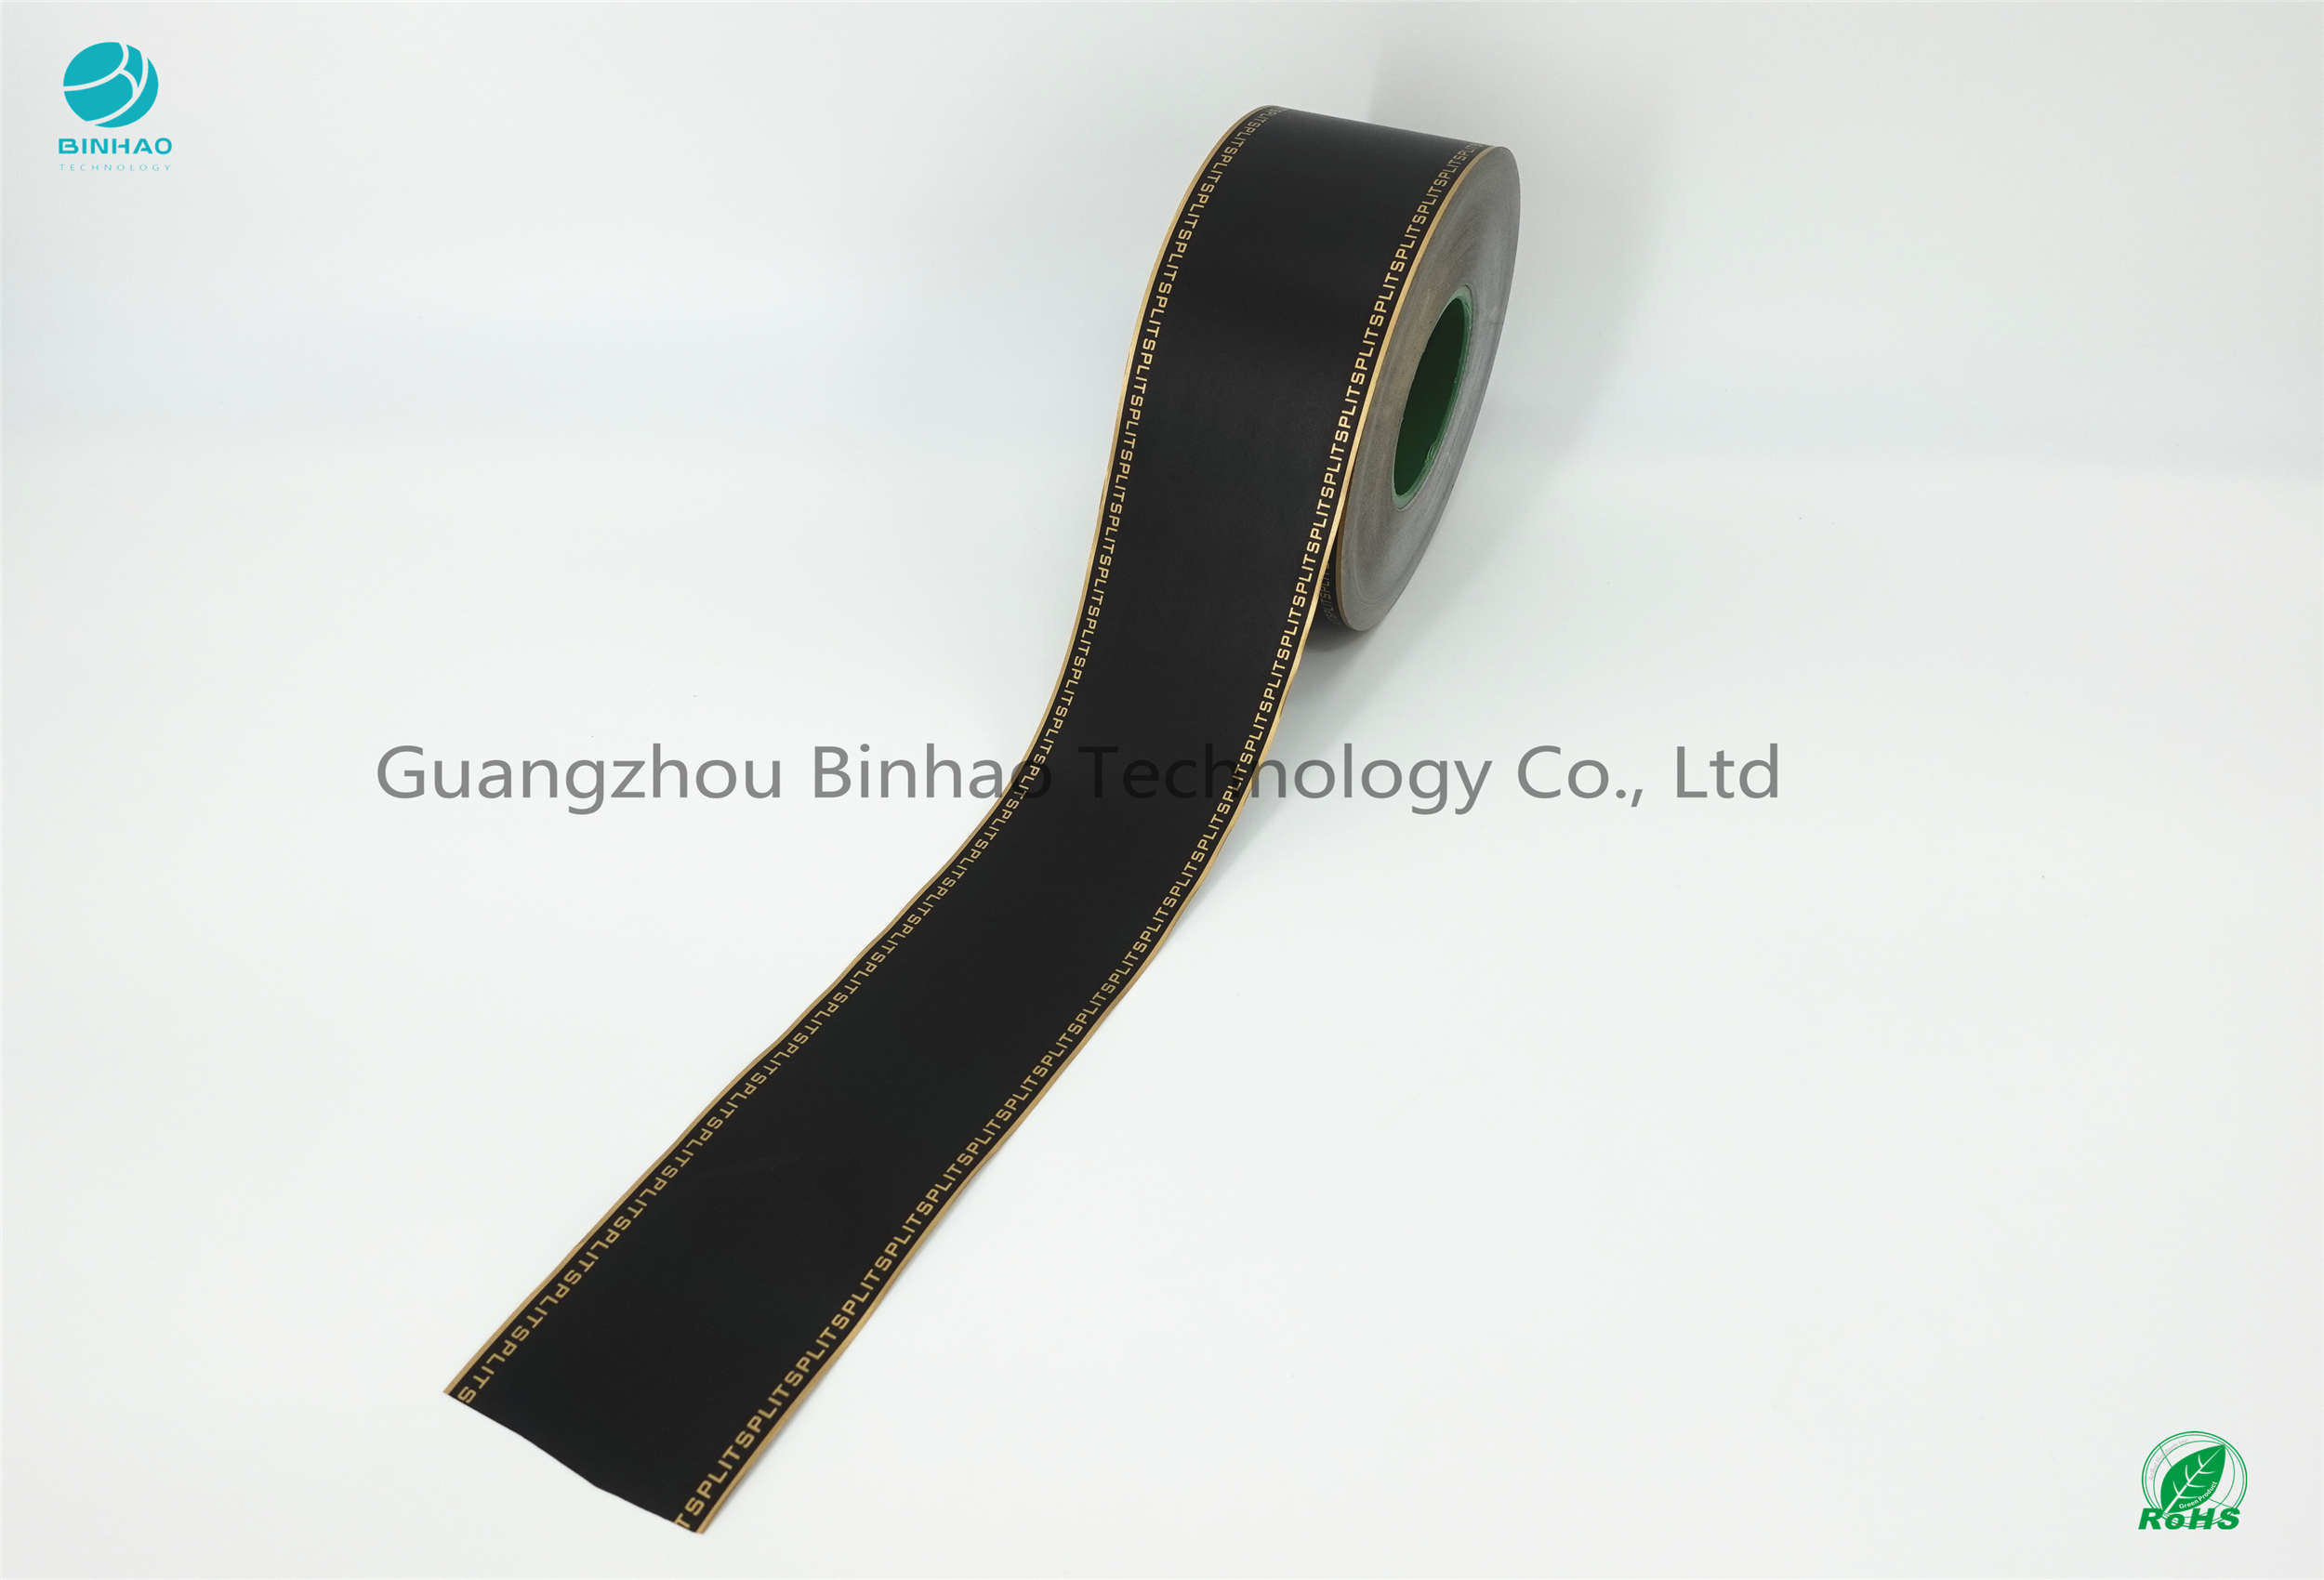 King Size Type Expansion Rate 3.5±0.5 Tobacco Filter Paper Black Color Coating